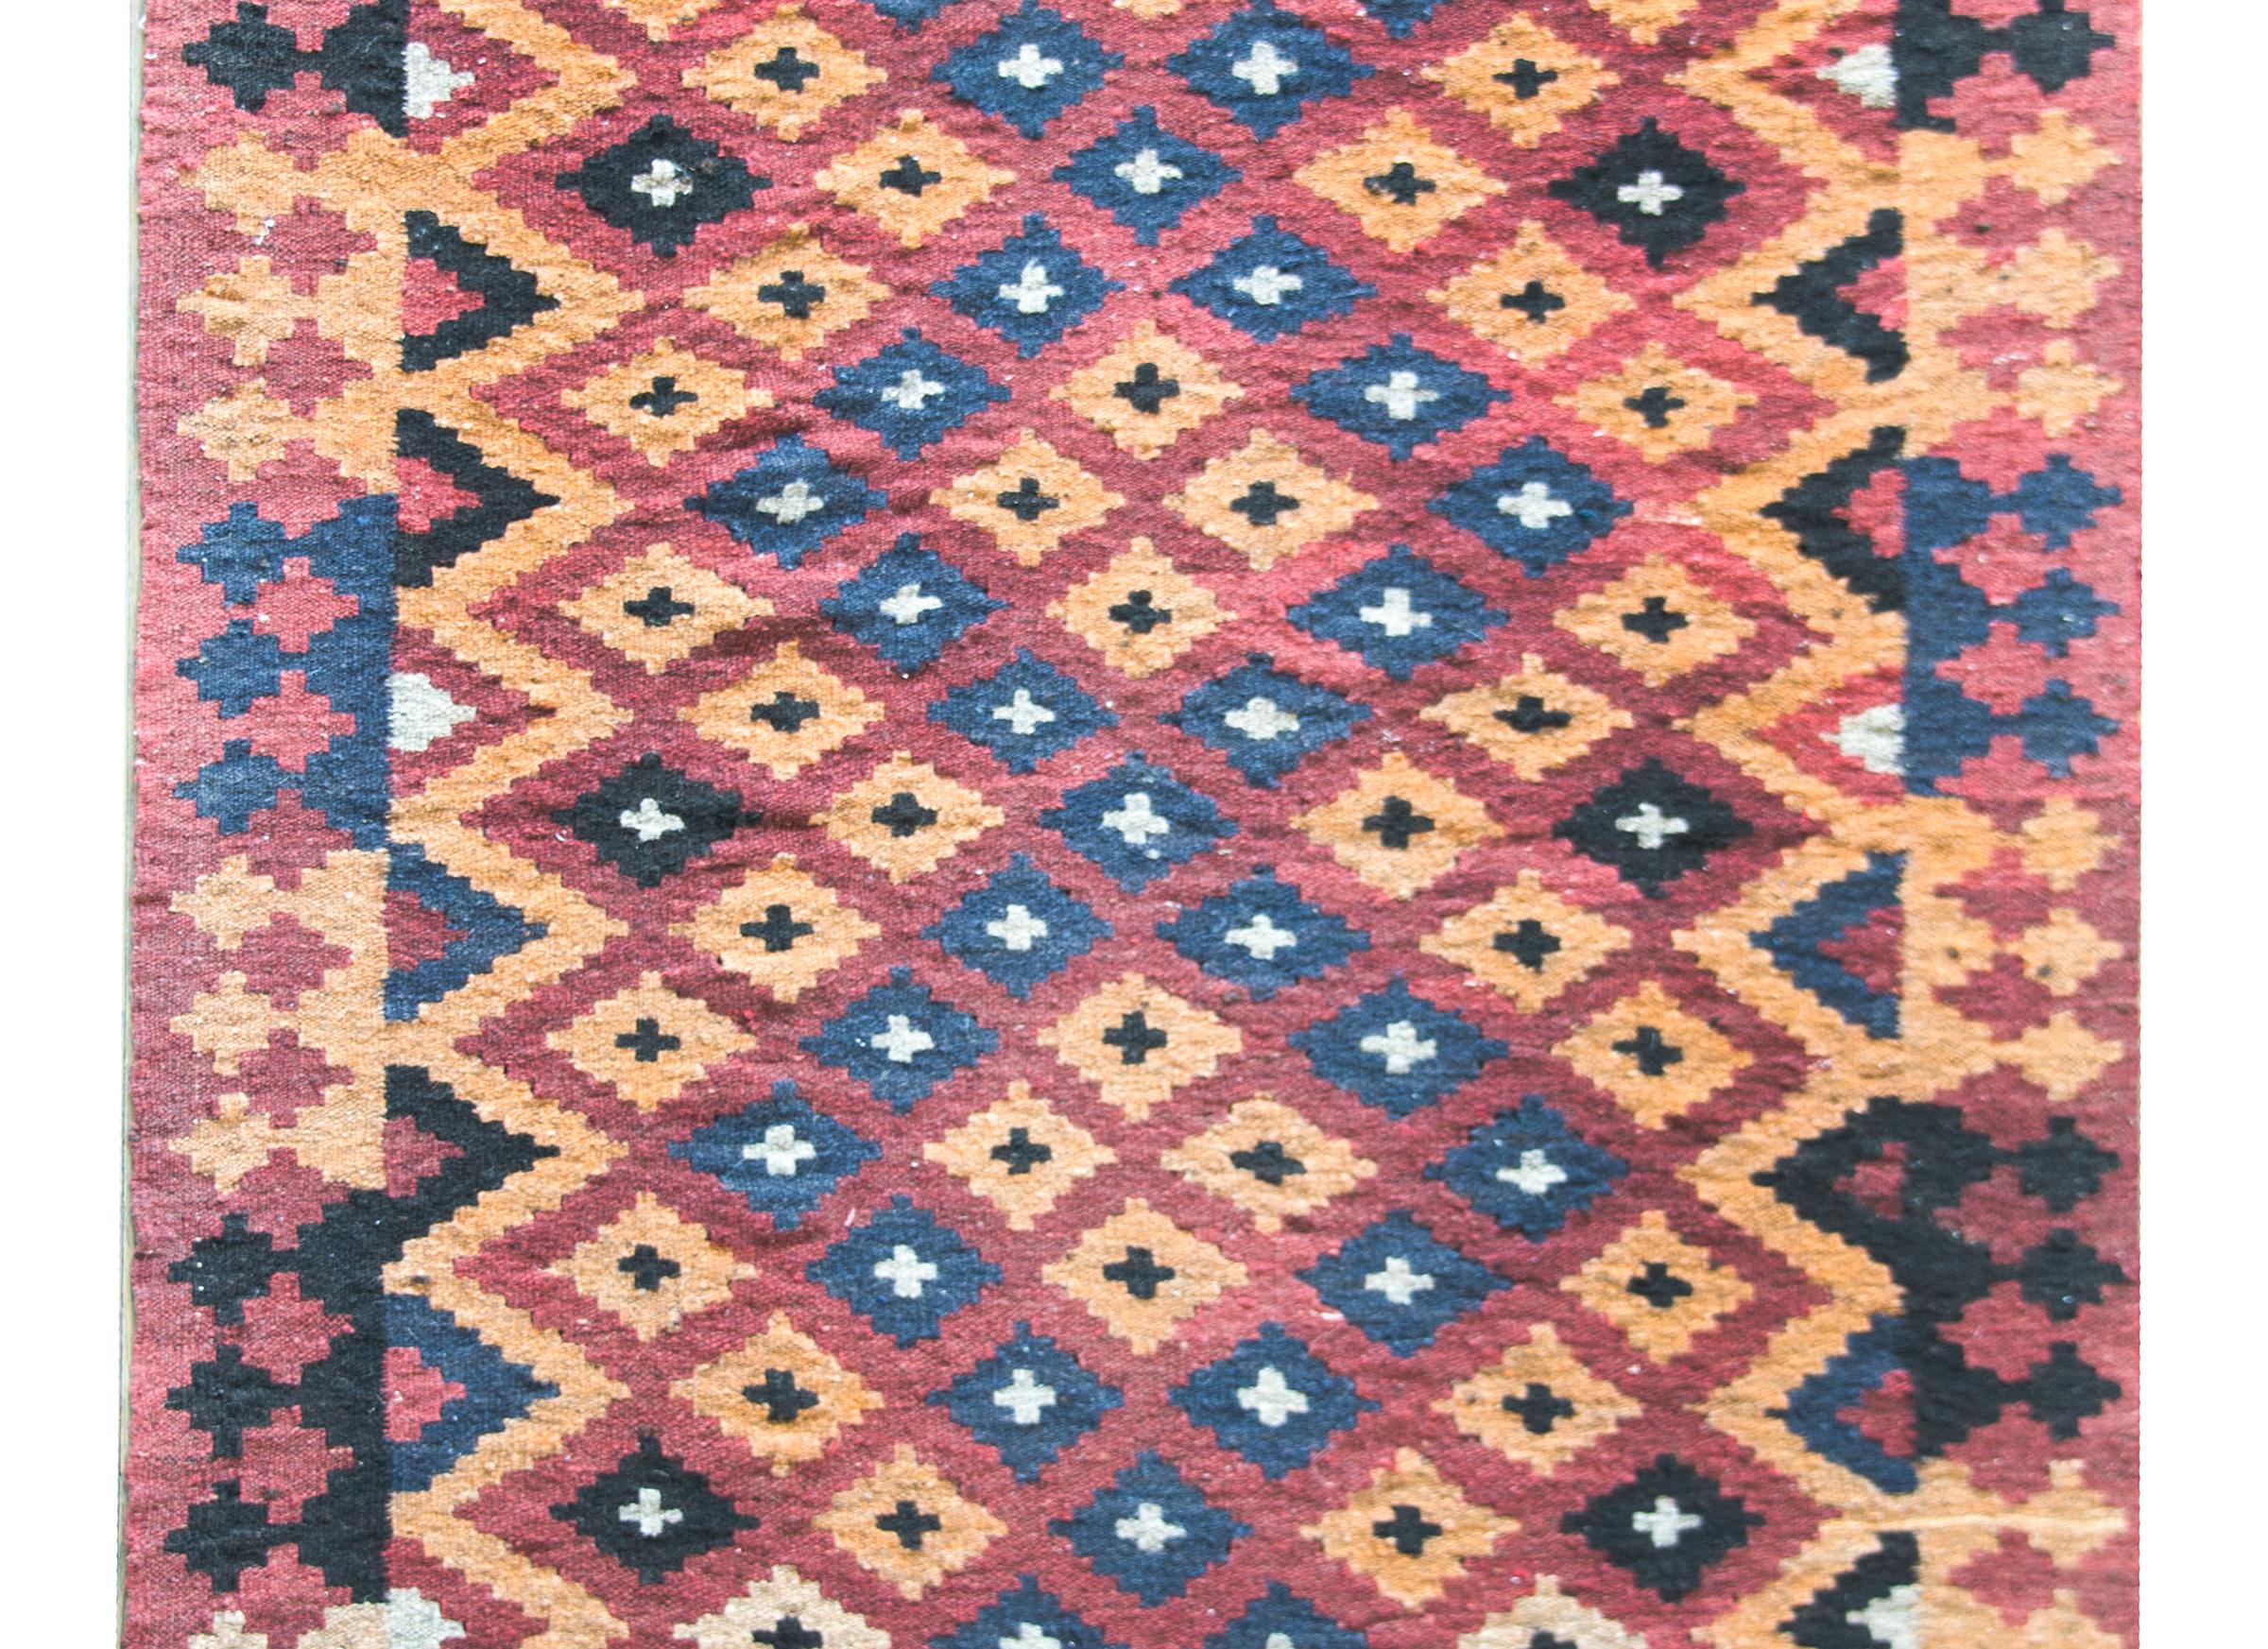 A wonderful mid-20th century Persian Afghani Kilim with an all over diamond pattern woven with an indigo diamond zigzag pattern against a golden diamond field. The top and bottom borders contain multicolored stripes and the sides borders contain